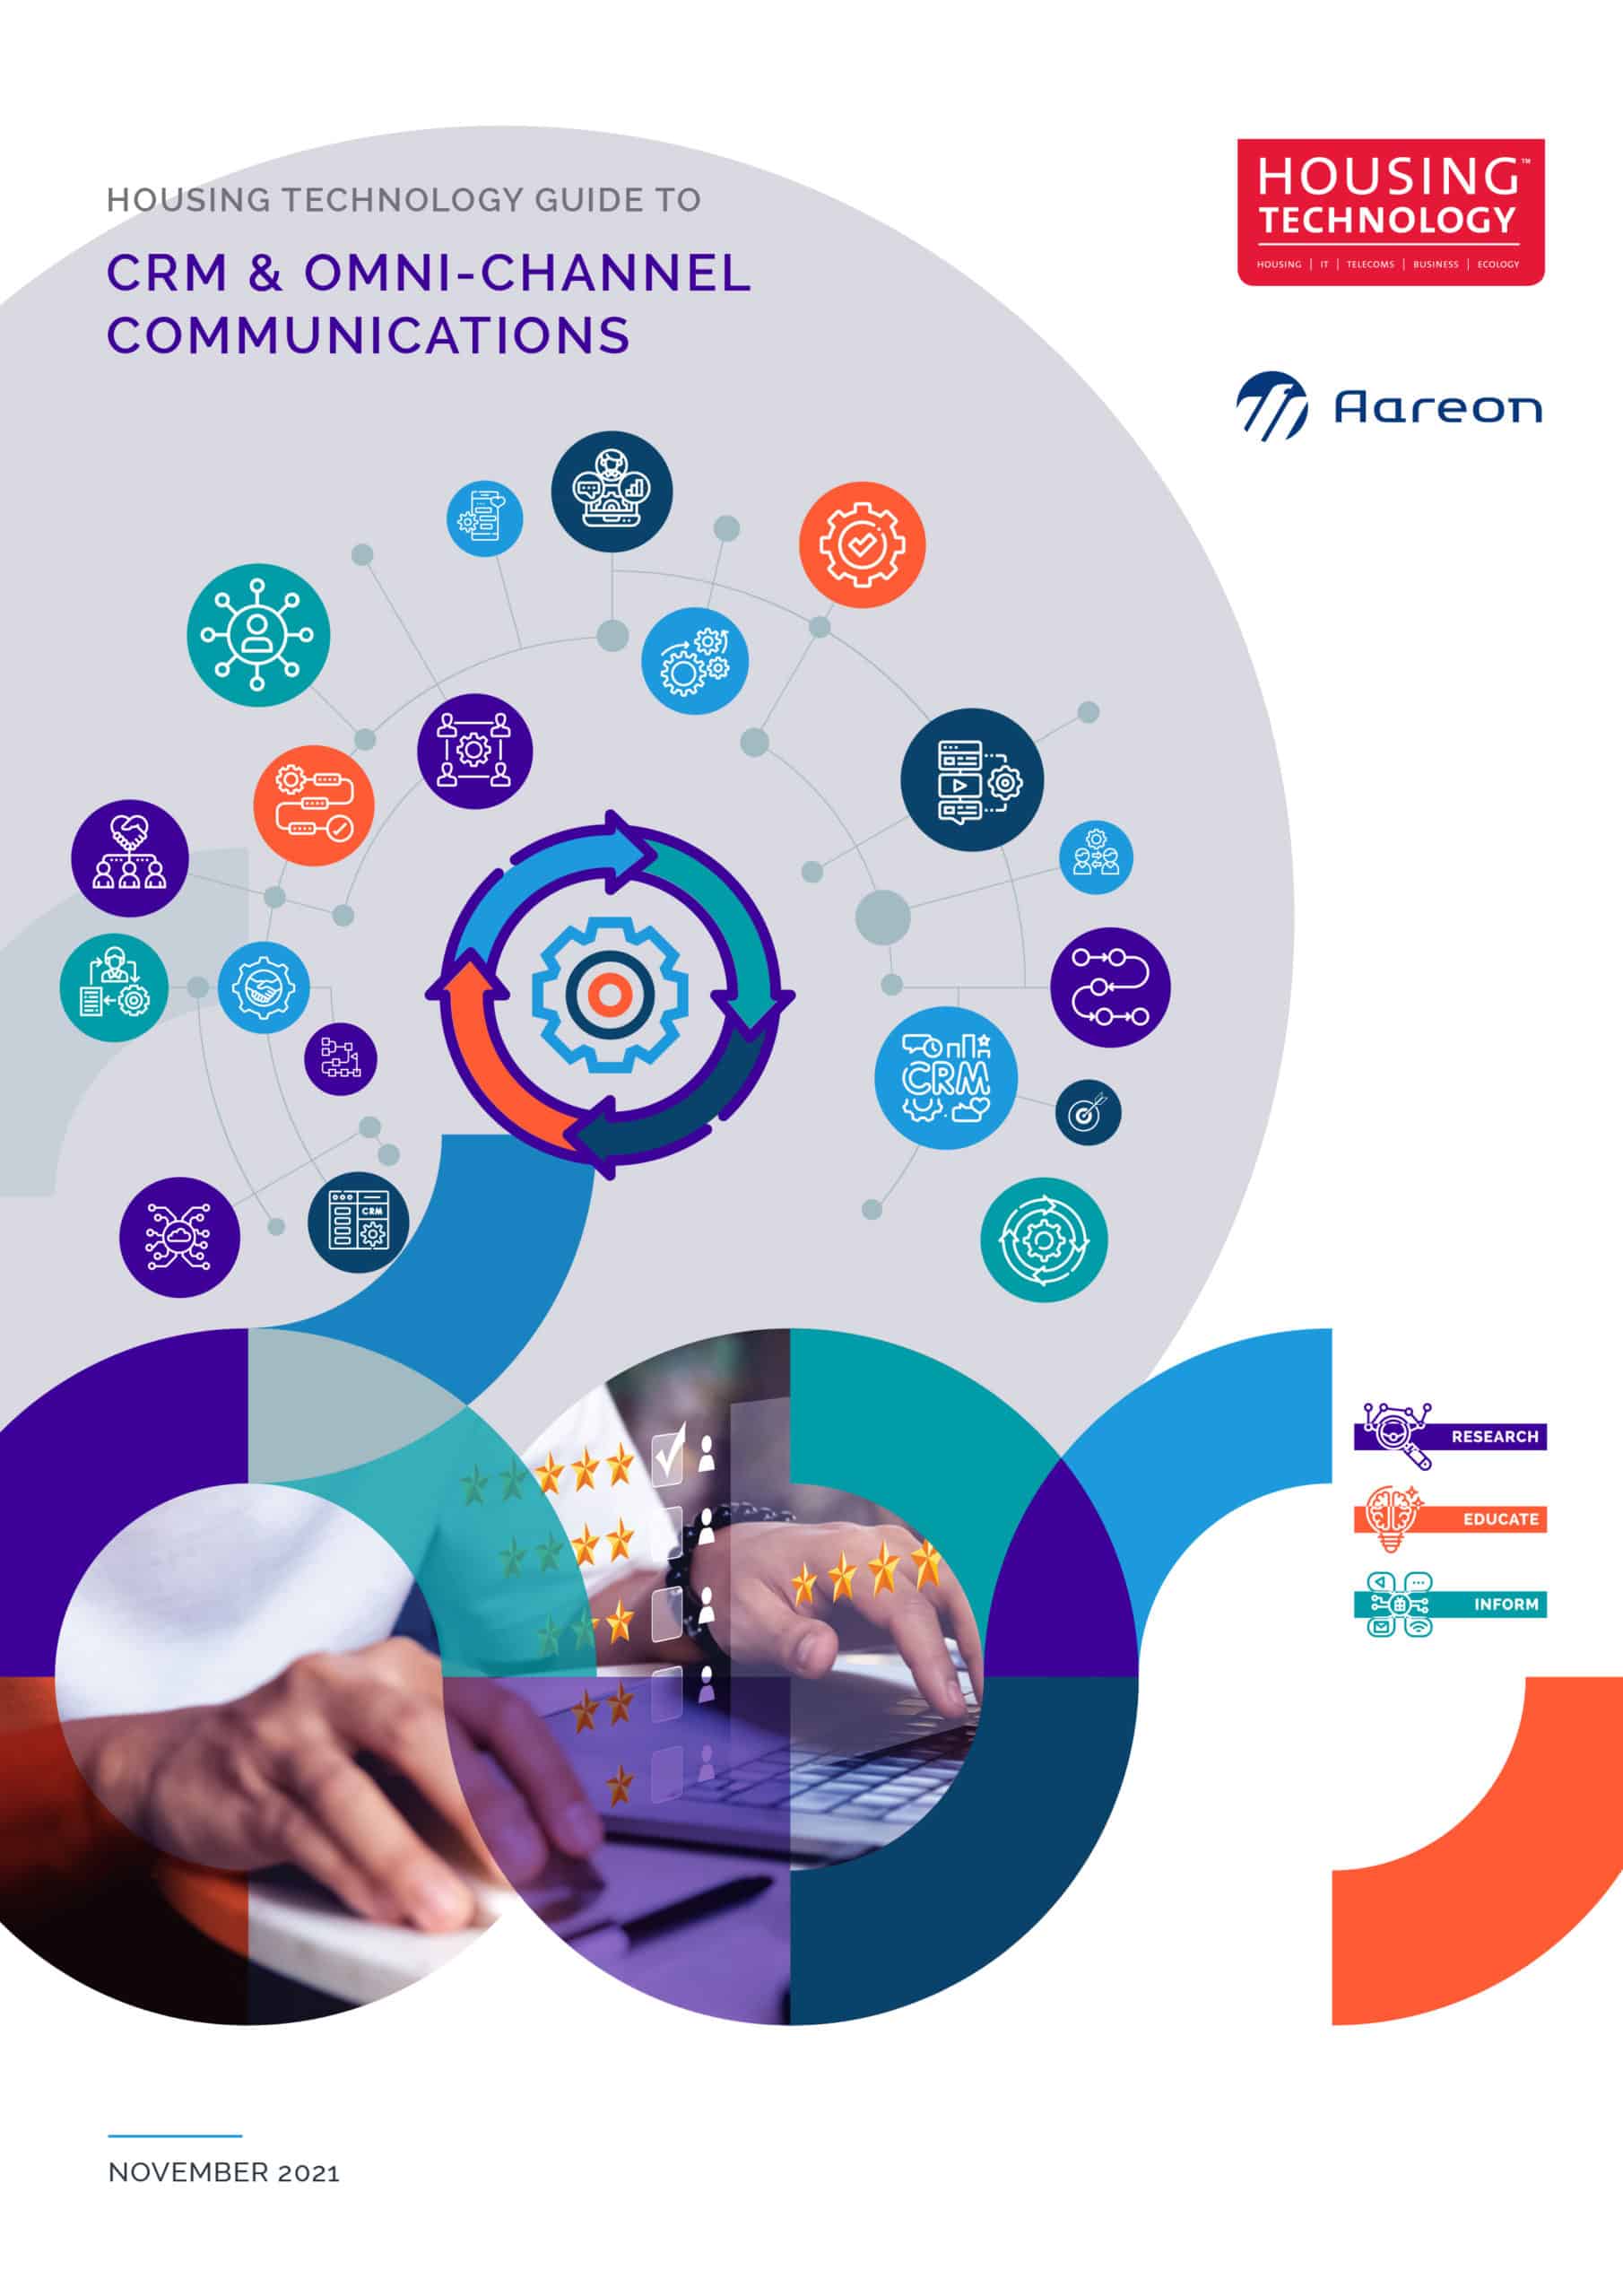 housing technology guide 2021 crm and omnichannel thumbnail image